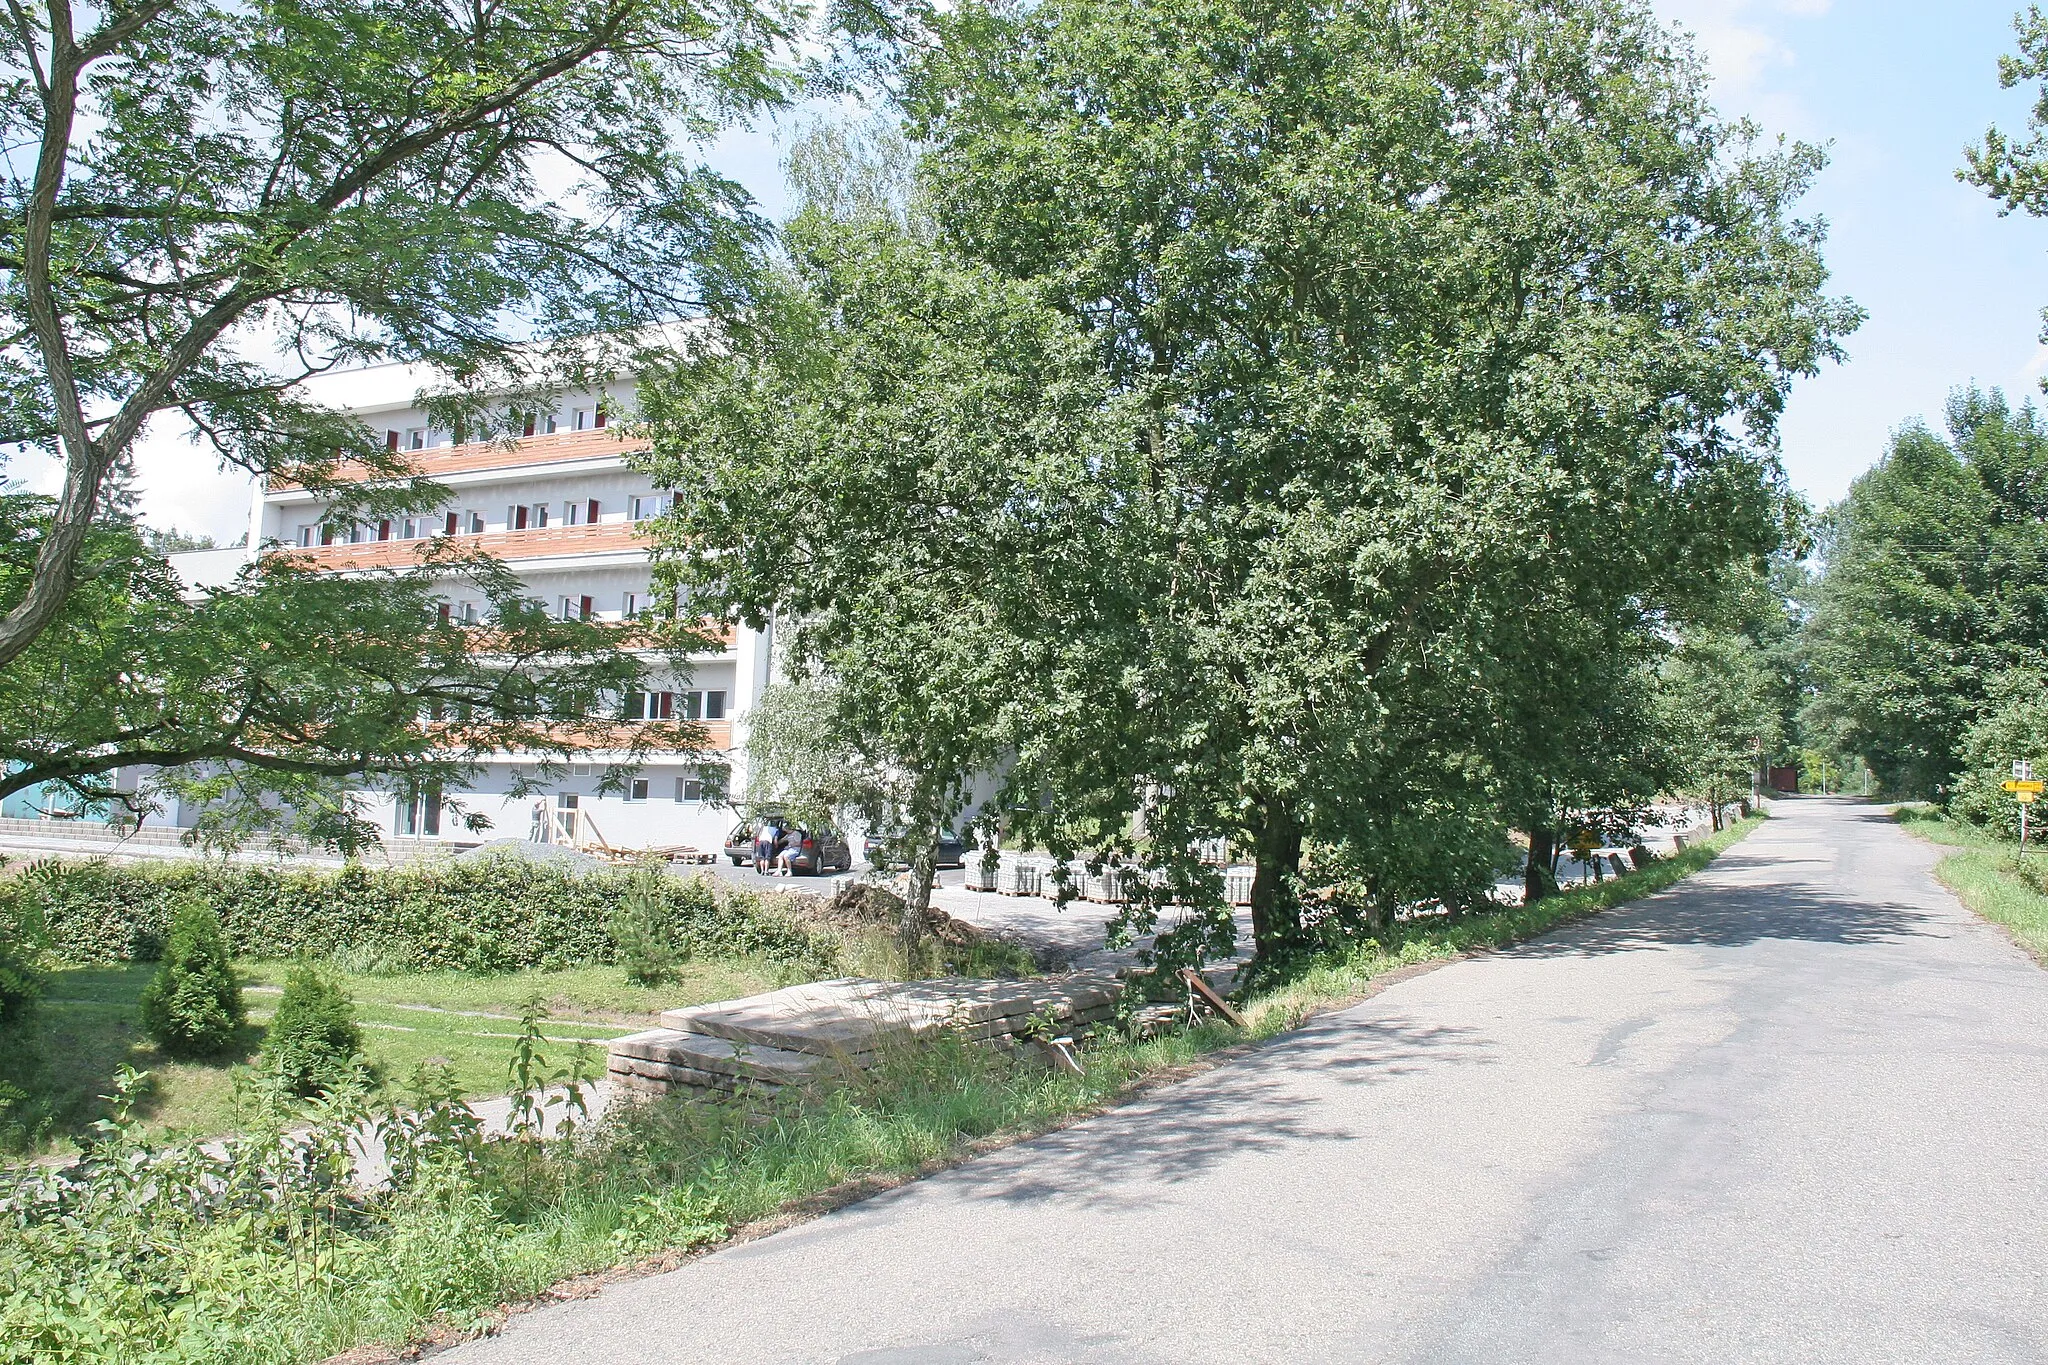 Photo showing: Peklo - hotel Kraskov
Camera location 49° 52′ 05.74″ N, 15° 36′ 35.36″ E View this and other nearby images on: OpenStreetMap 49.868260;   15.609823

This file was created as a part of the photographic program of Wikimedia Czech Republic. Project: Foto českých obcí The program supports Wikimedia Commons photographers in the Czech Republic.